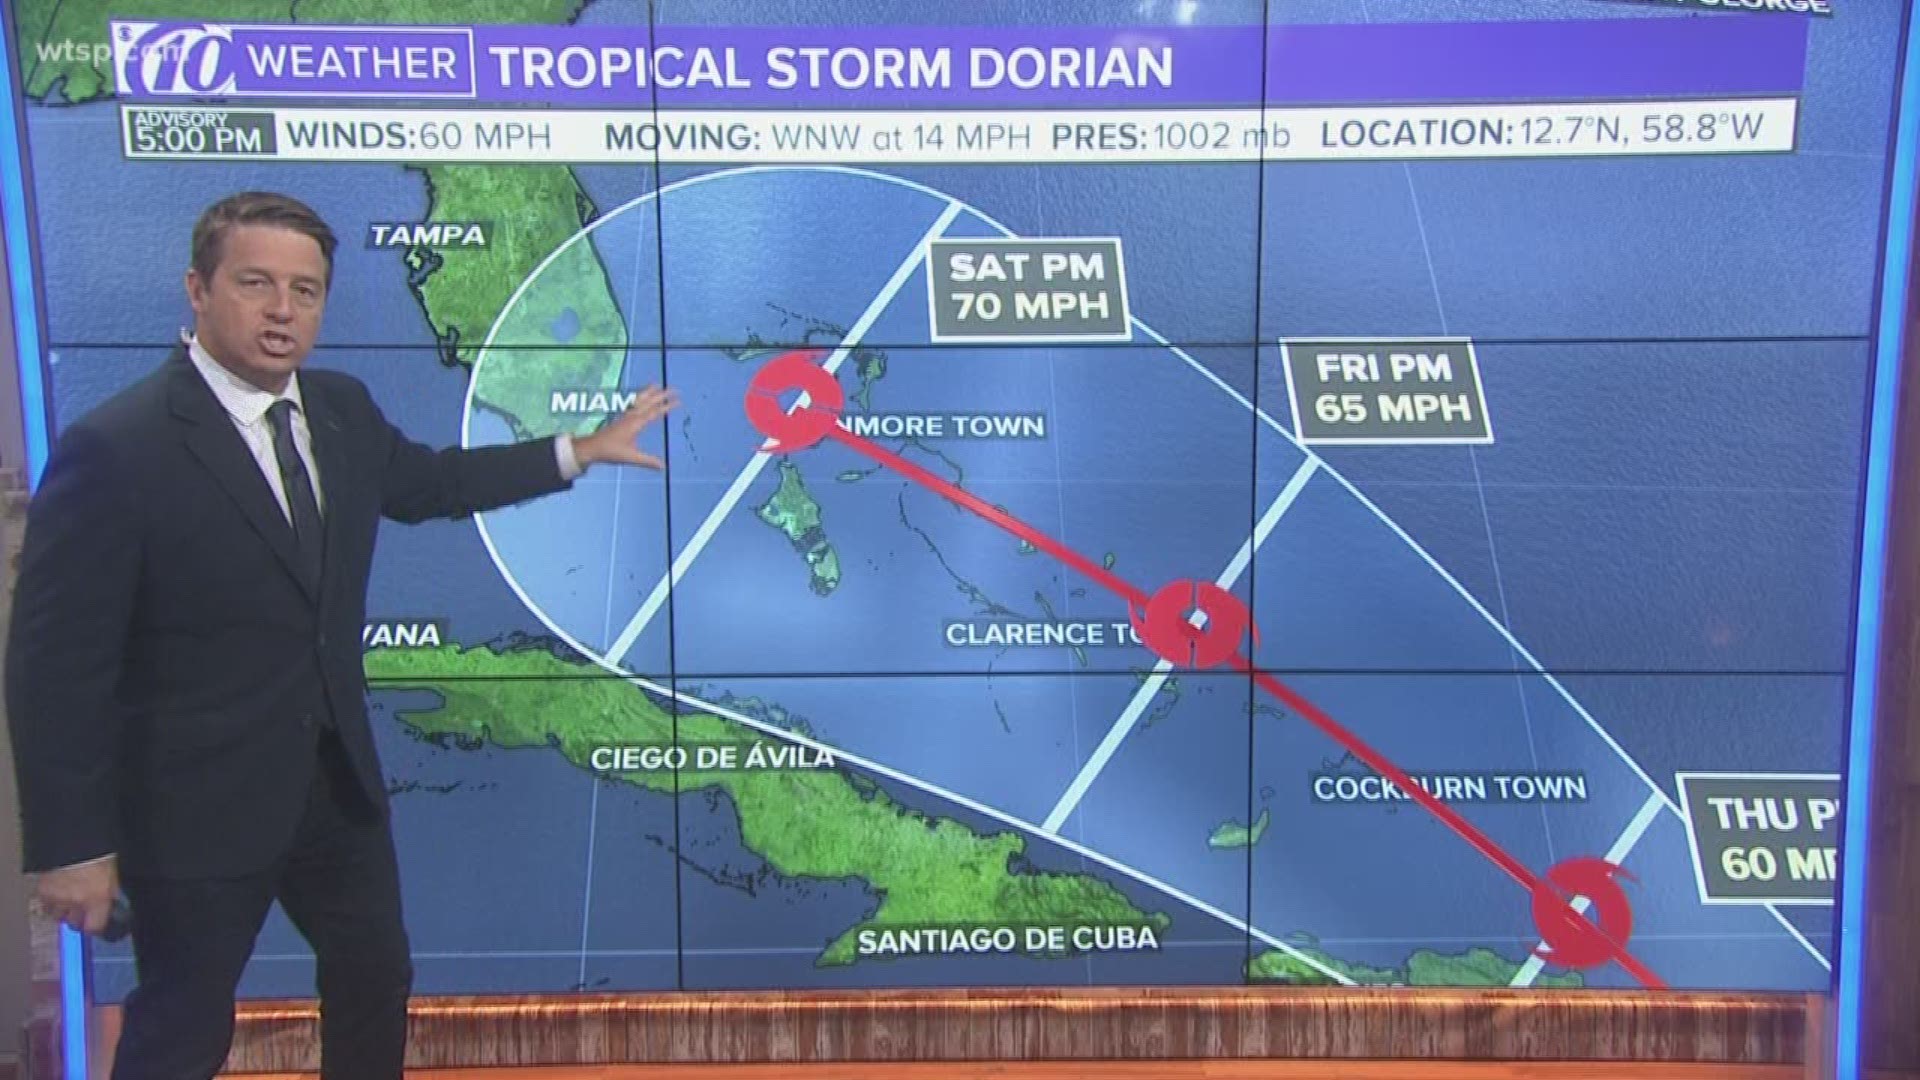 The current cone of uncertainty storm track for Tropical Storm Dorian now includes all of South Florida and much of the Florida Keys.

However, it remains too early to determine the extent Dorian could affect the state.

Maximum sustained winds are 60 mph, and the storm is moving west-northwest at 14 mph, according to the National Hurricane Center's latest advisory.